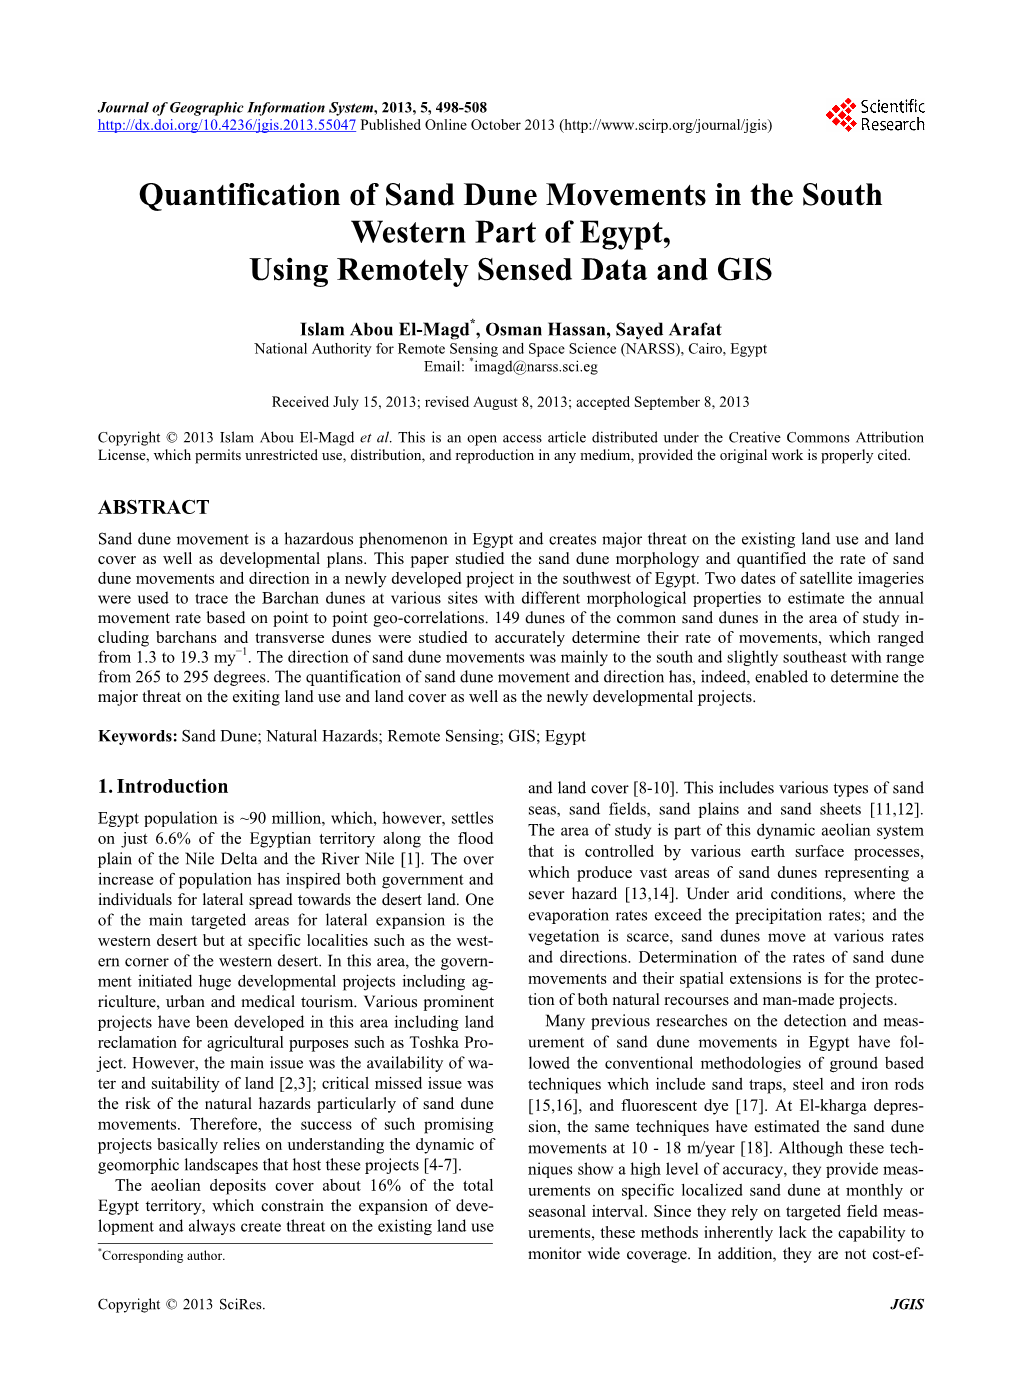 Quantification of Sand Dune Movements in the South Western Part of Egypt, Using Remotely Sensed Data and GIS